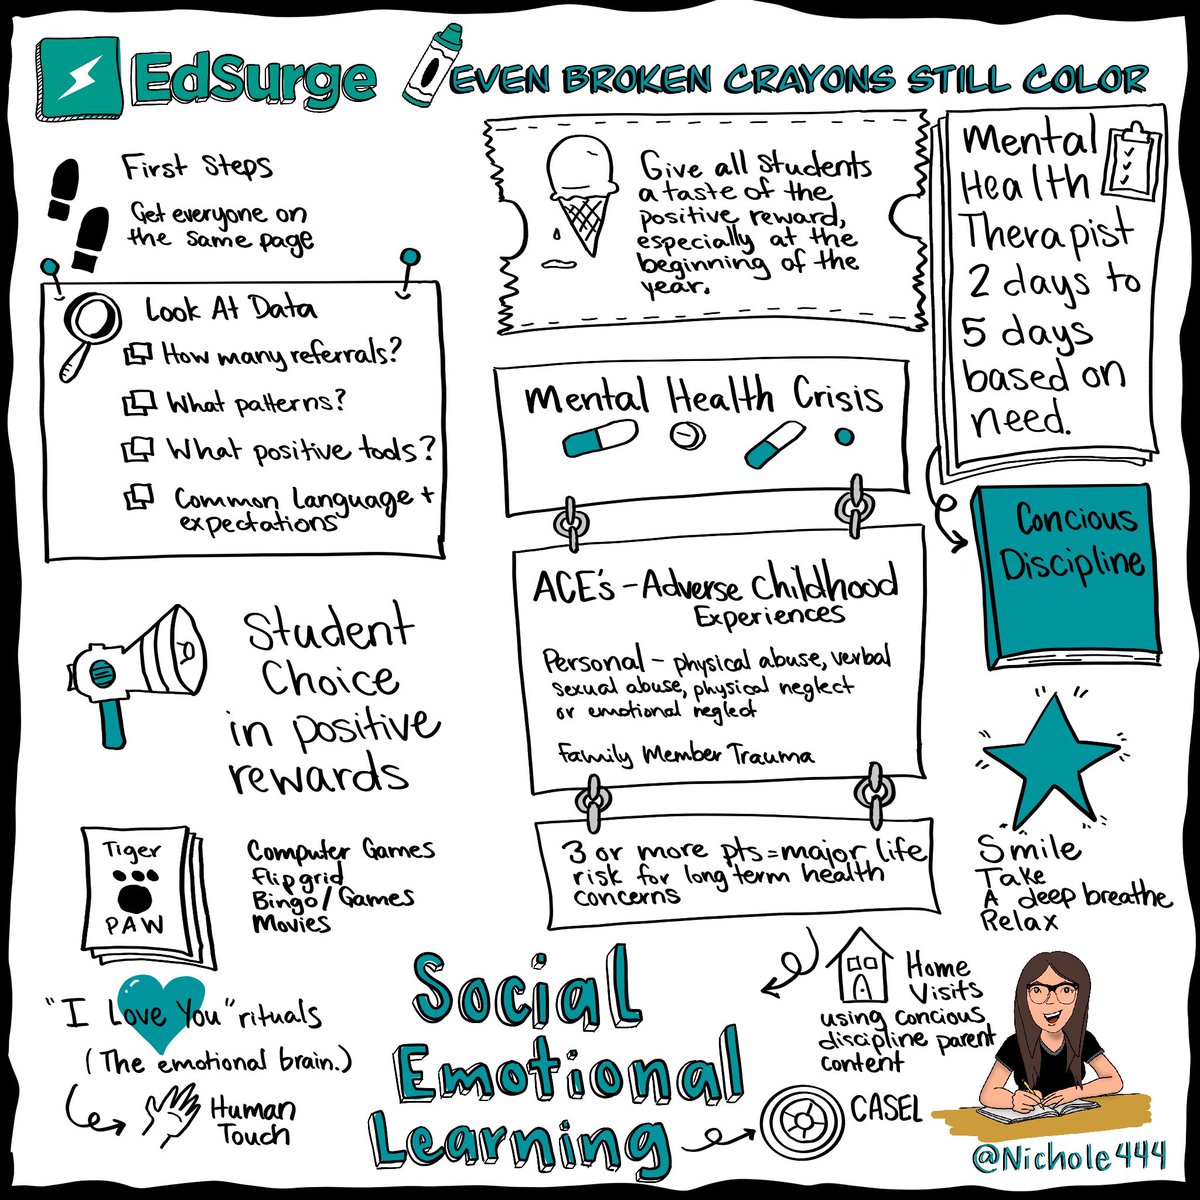 Thanks for the information today on social emotional learning and behavior in your k-8 school! @AMasonPrincipal #EdSurgeFusion @EdSurge #sketchnote